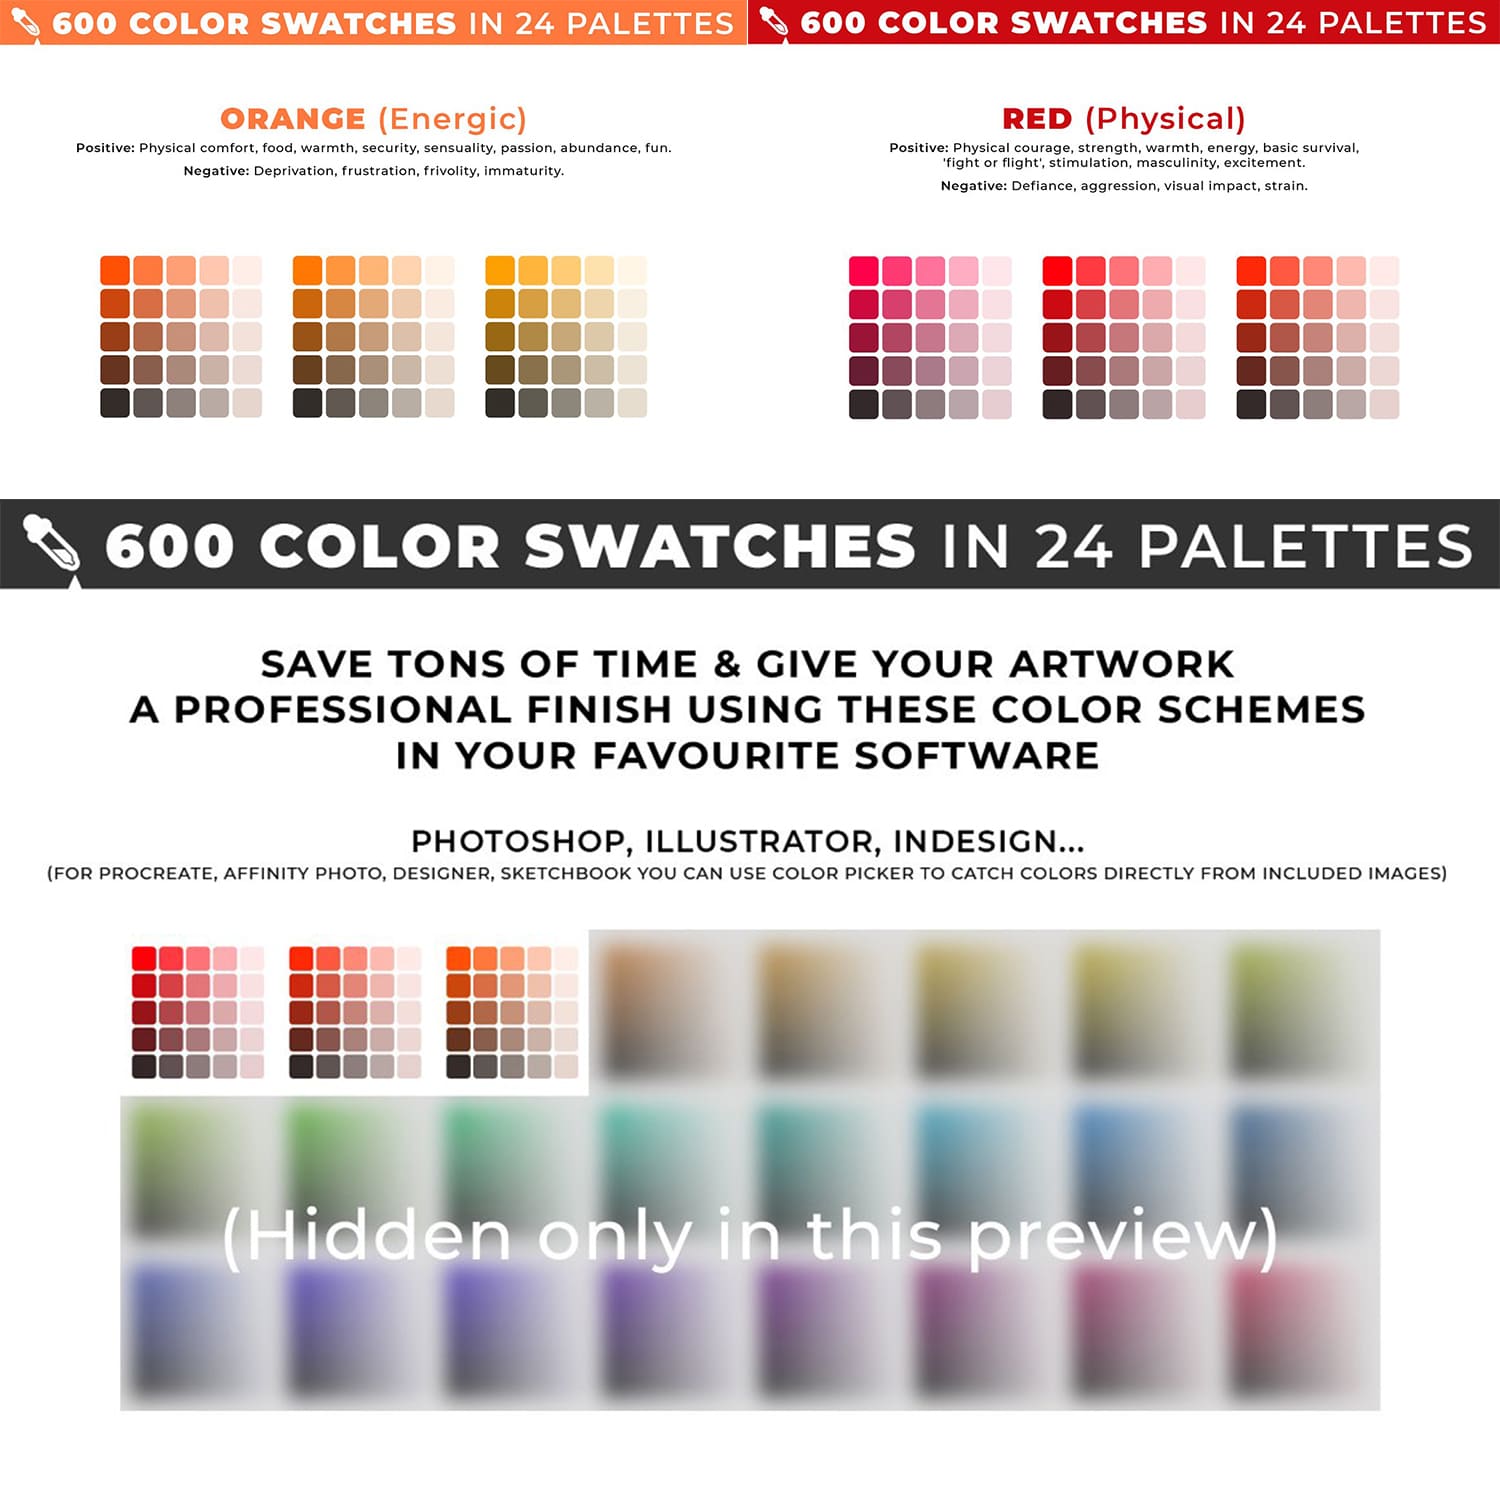 600 Color Swatches In 24 Palettes - "Save Tons Of Time & Give Your Artwork A Professional Finish".